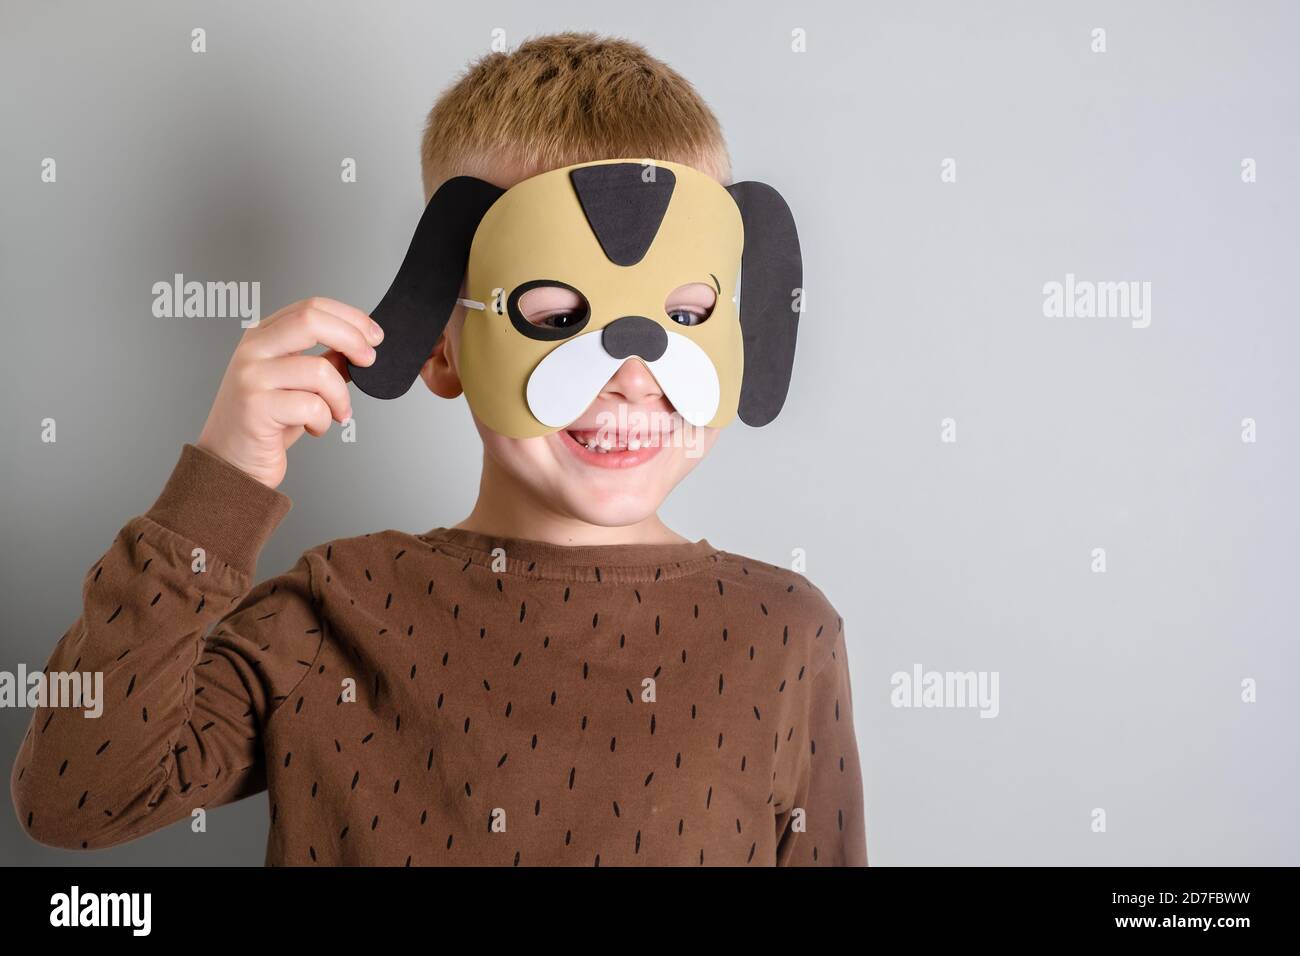 portrait of a boy smiling without a tooth in a dog mask. isolated on gray background Stock Photo